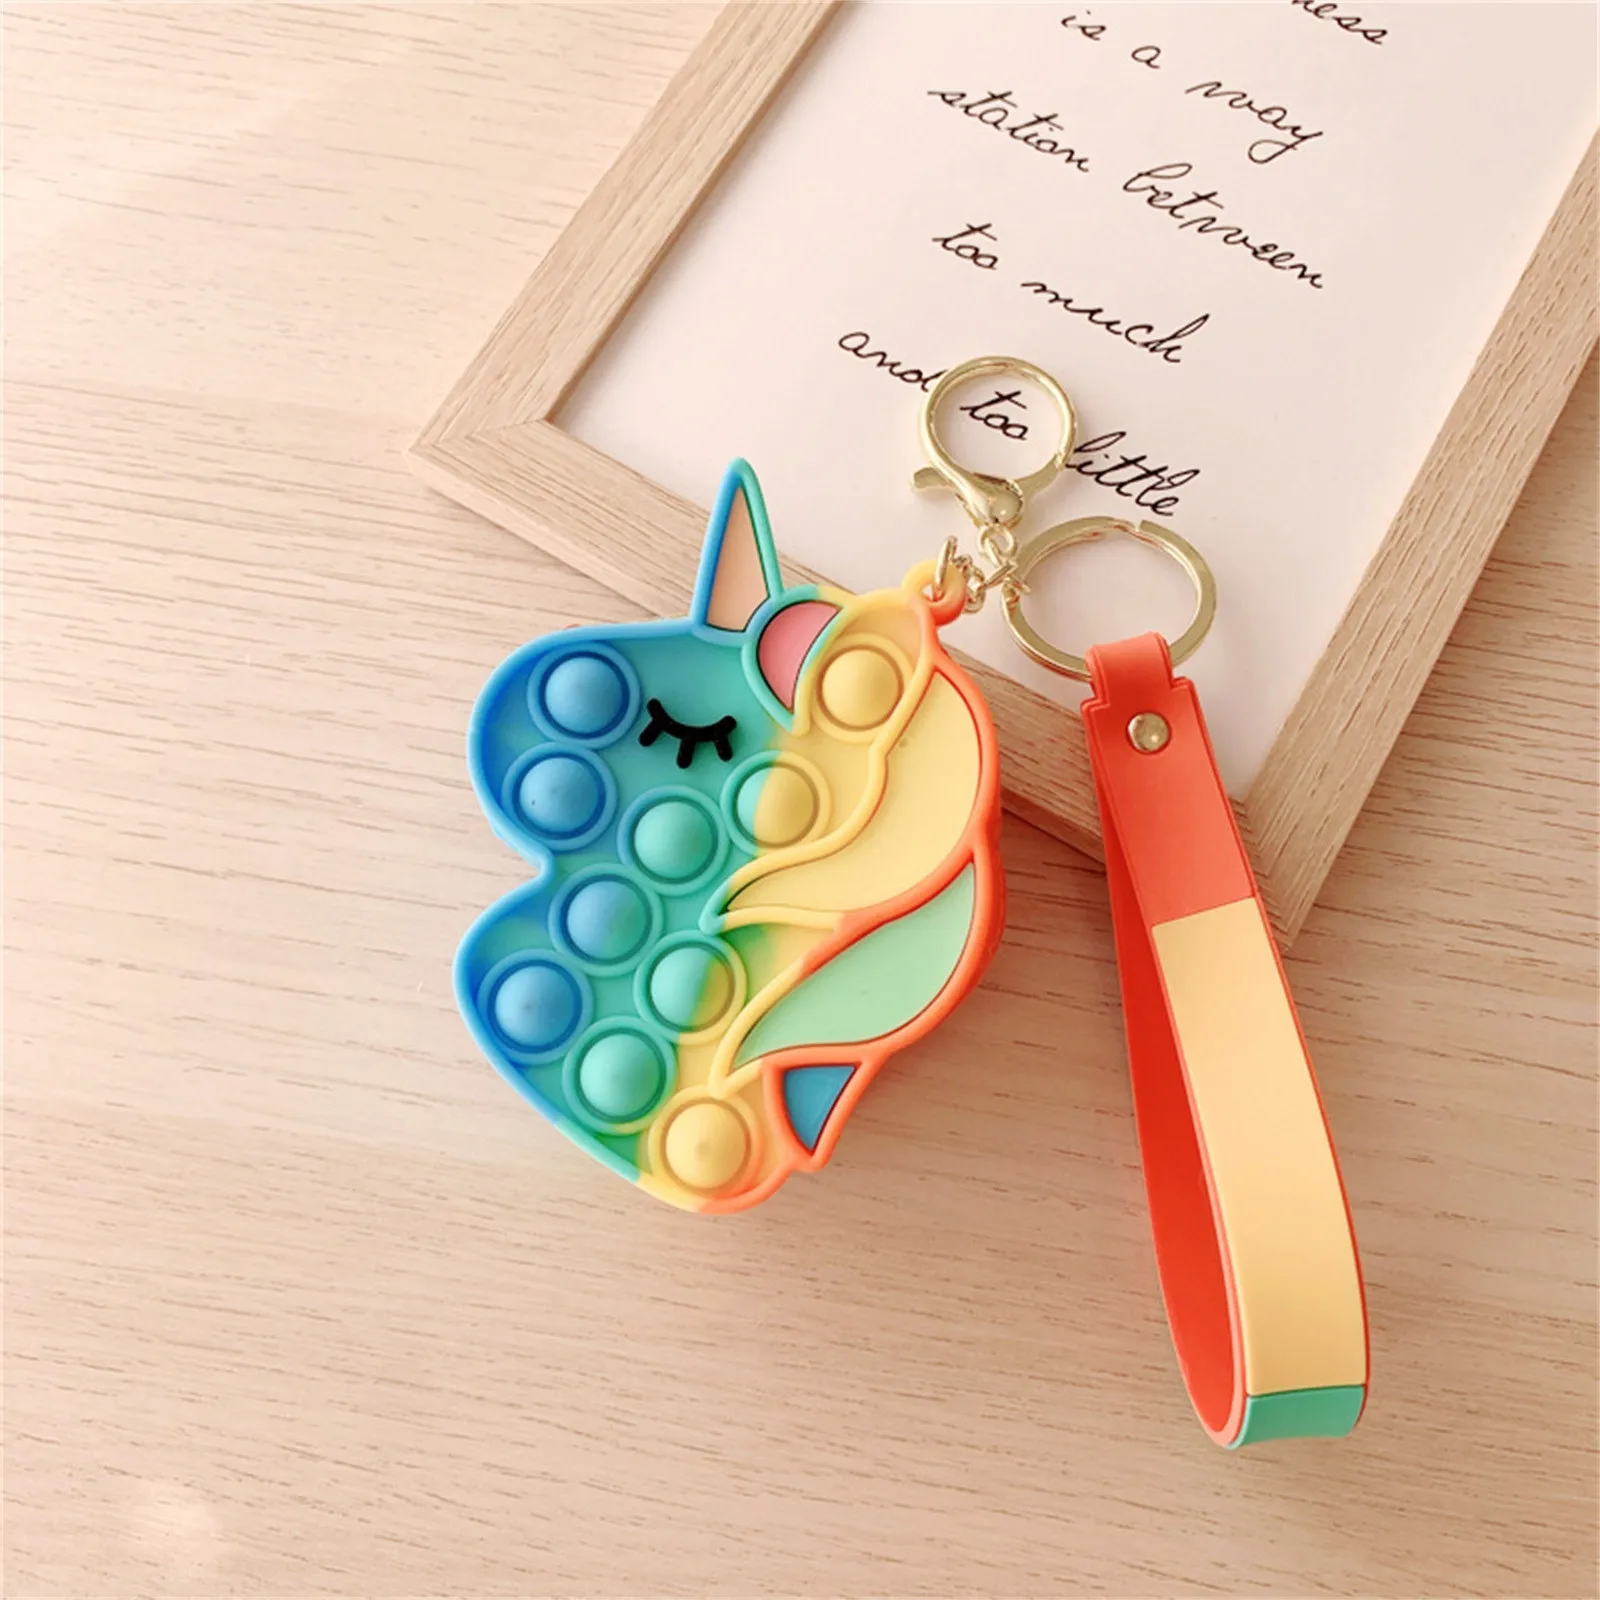 dna stress ball 2021 Pops its Fidget Toy Antistress Rainbow Pops Push Bubble Simple Dimple Keychain Fidget Stress Relief Its Toys For Kids Adult dna ball fidget